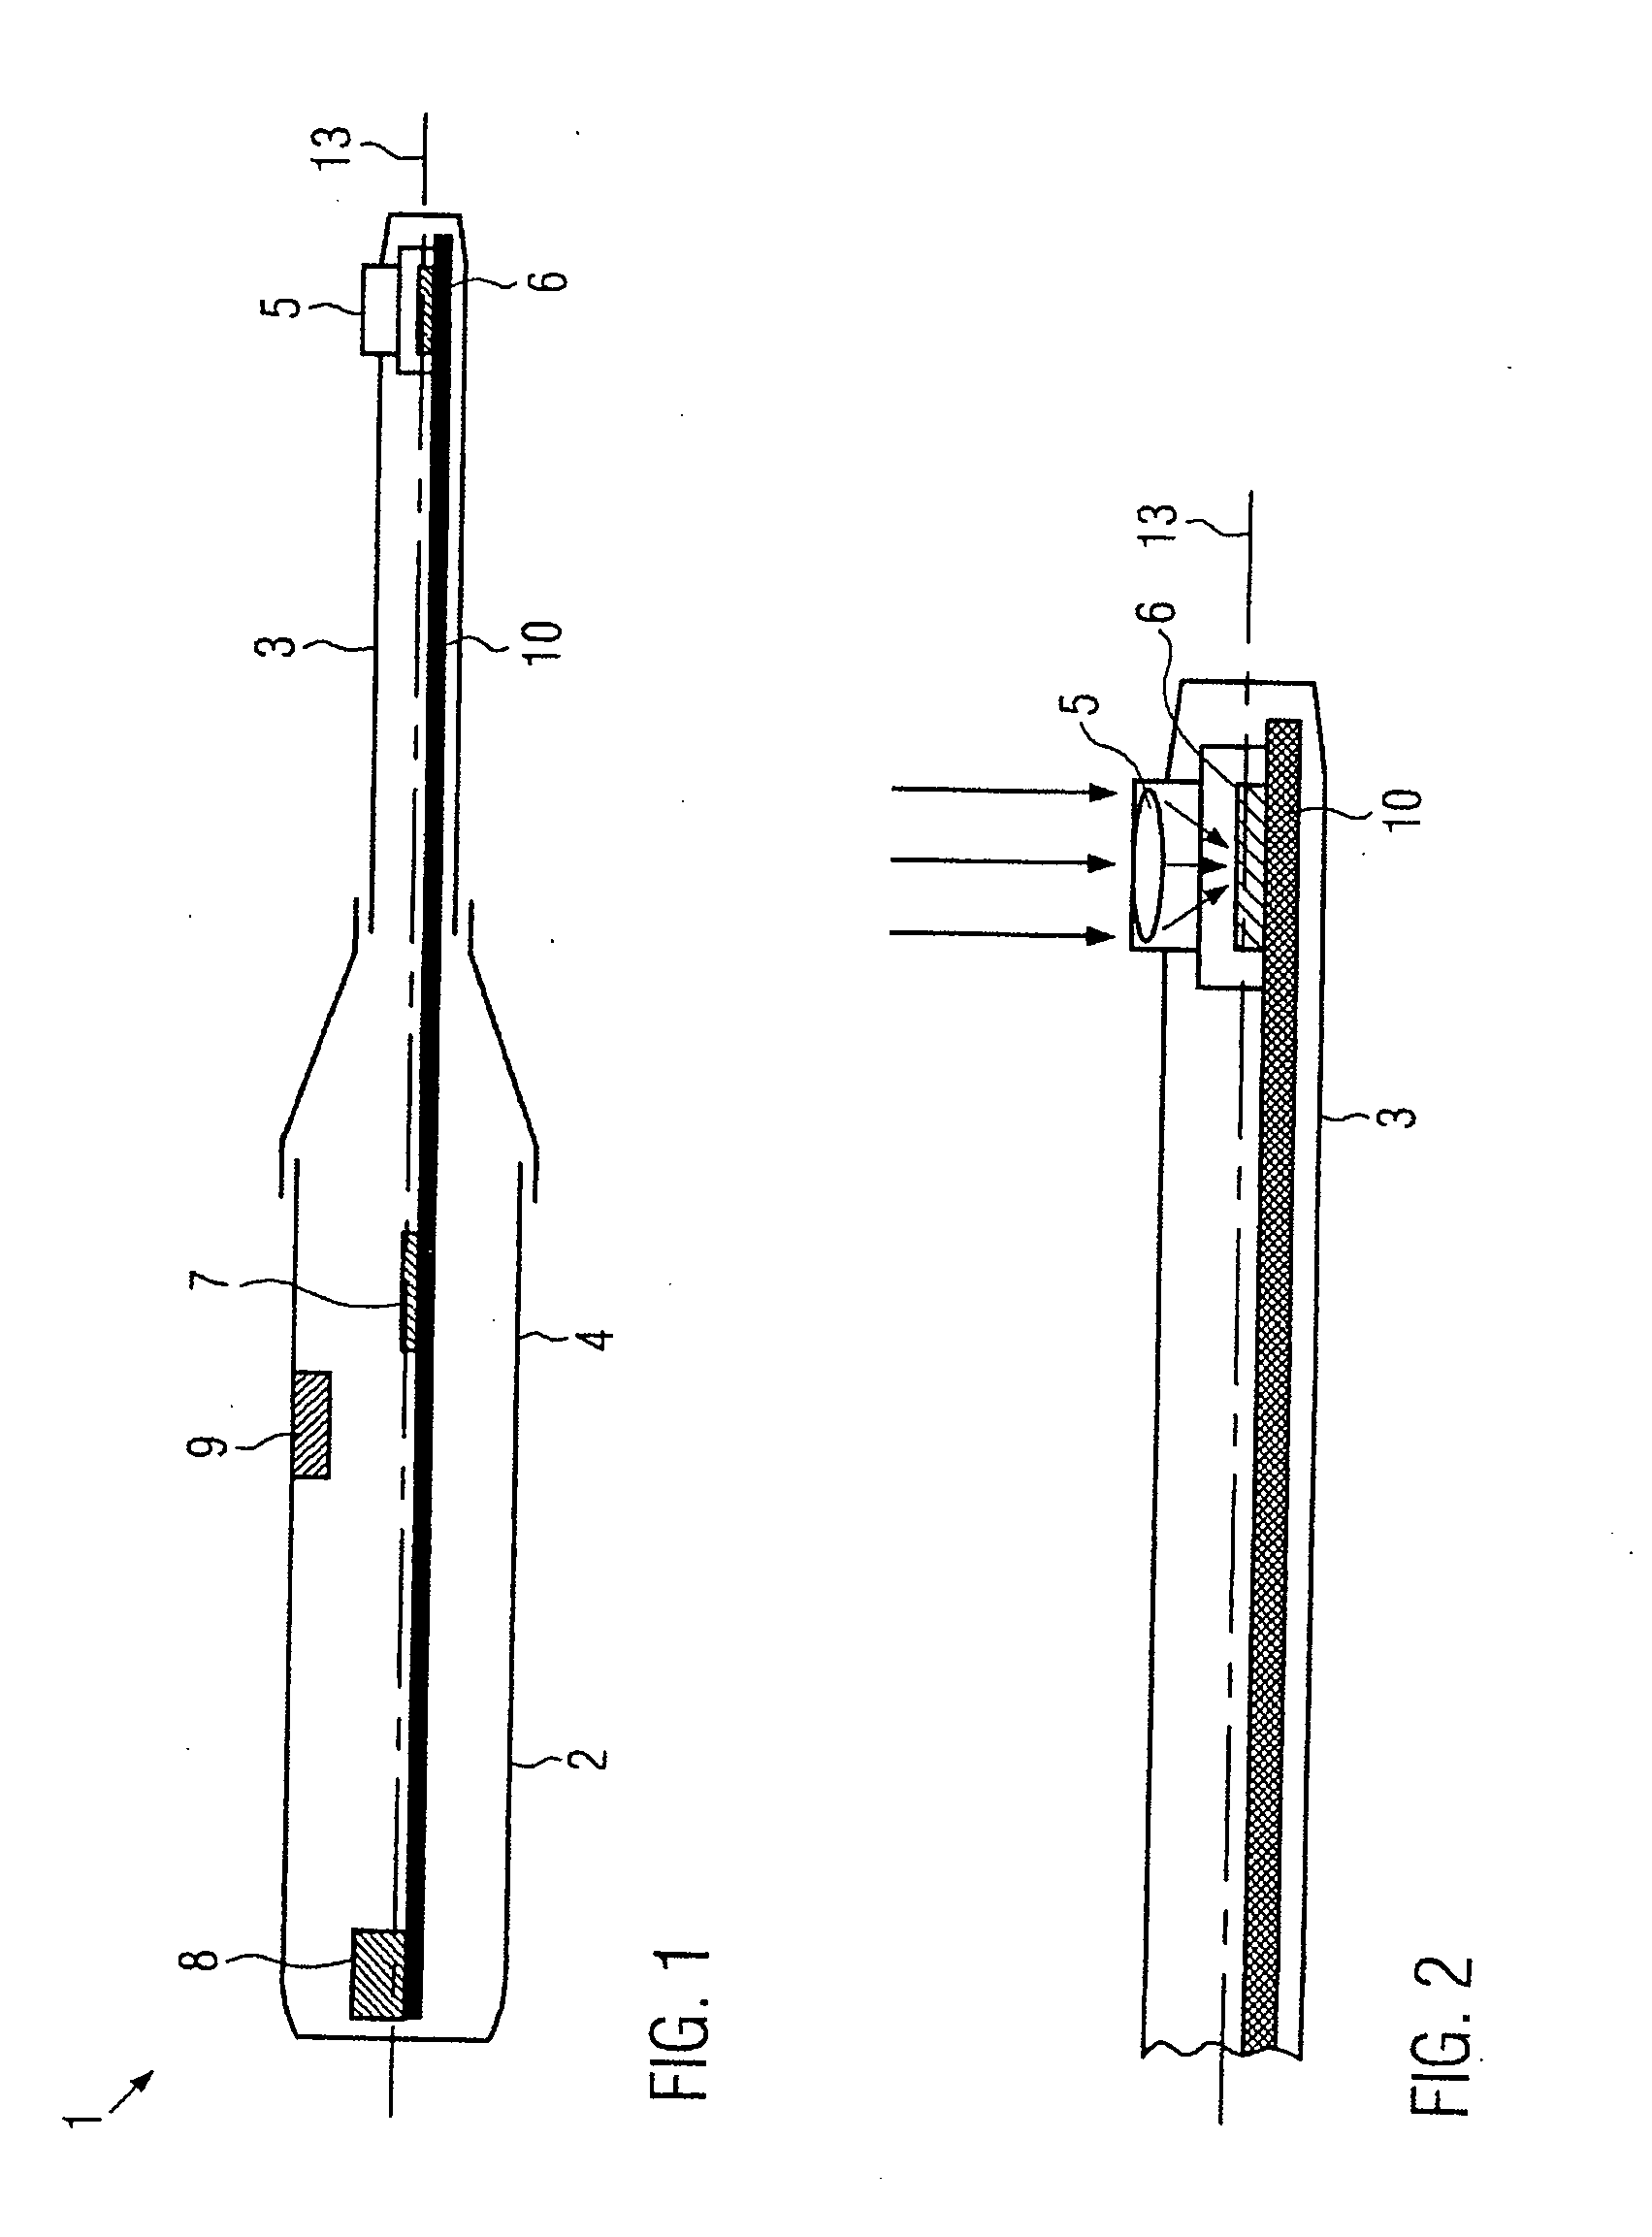 Endoscope with a digital view system such as a digital camera